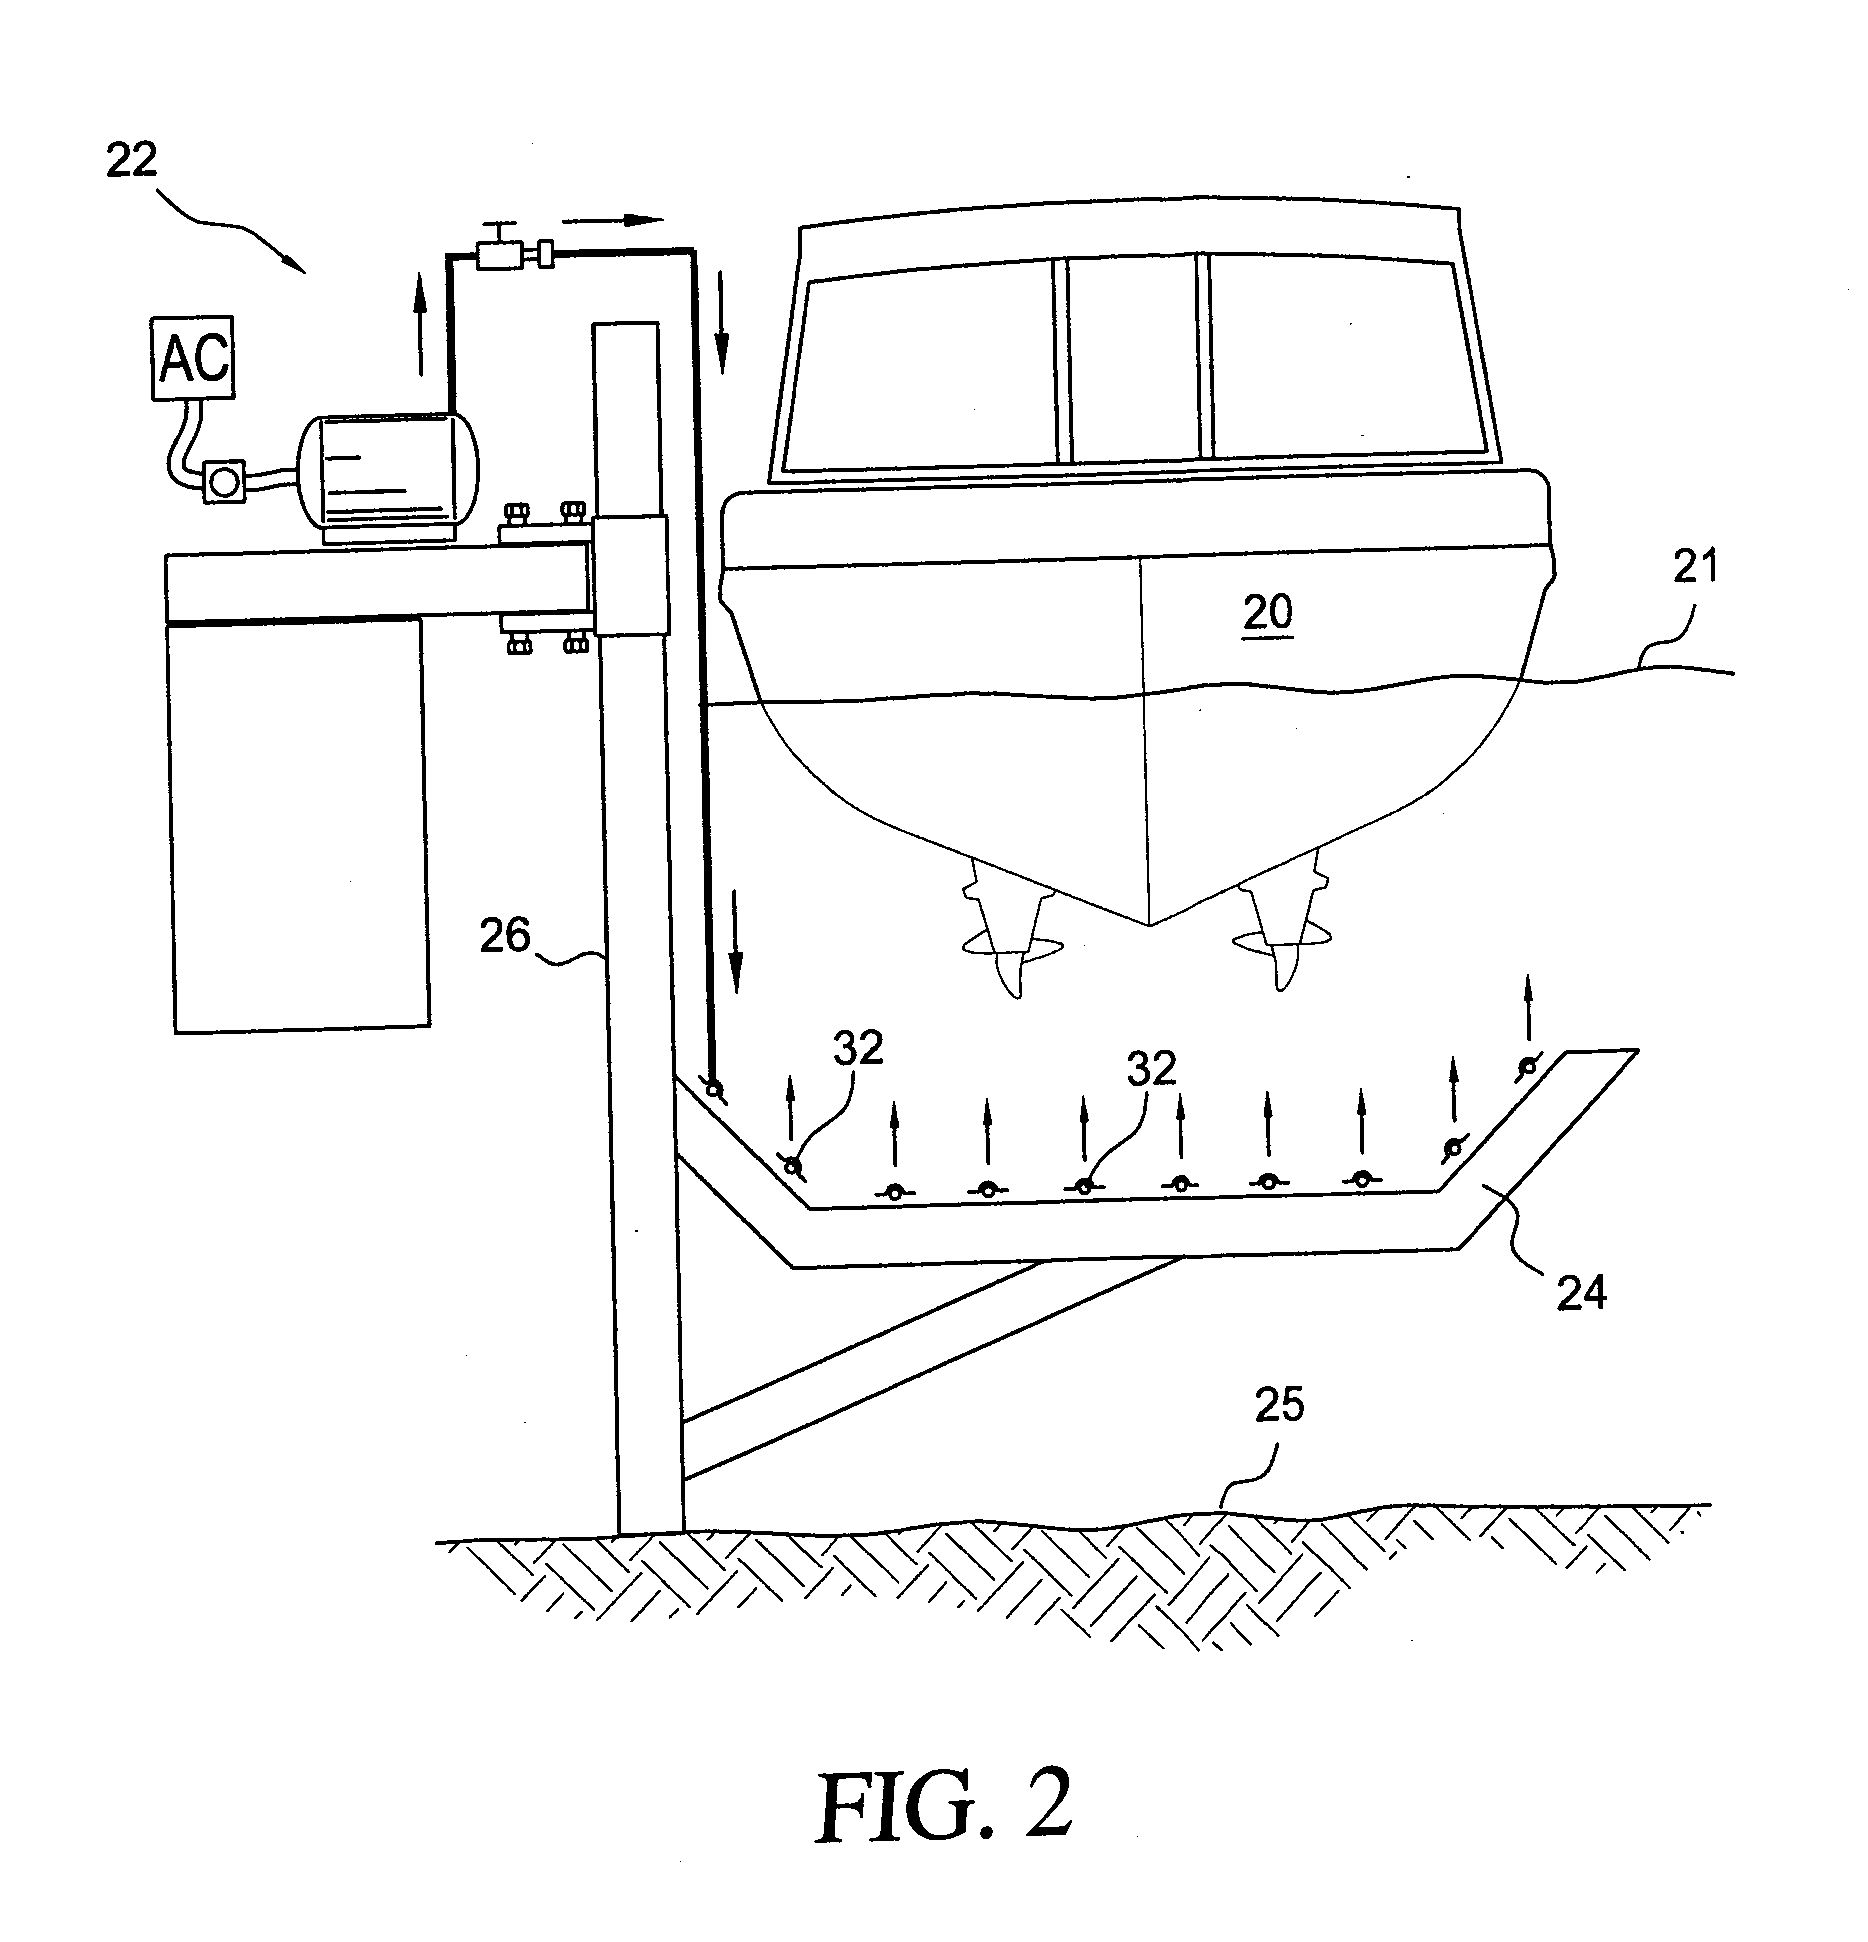 Apparatus and Method for Inhibiting Fouling of an Underwater Surface